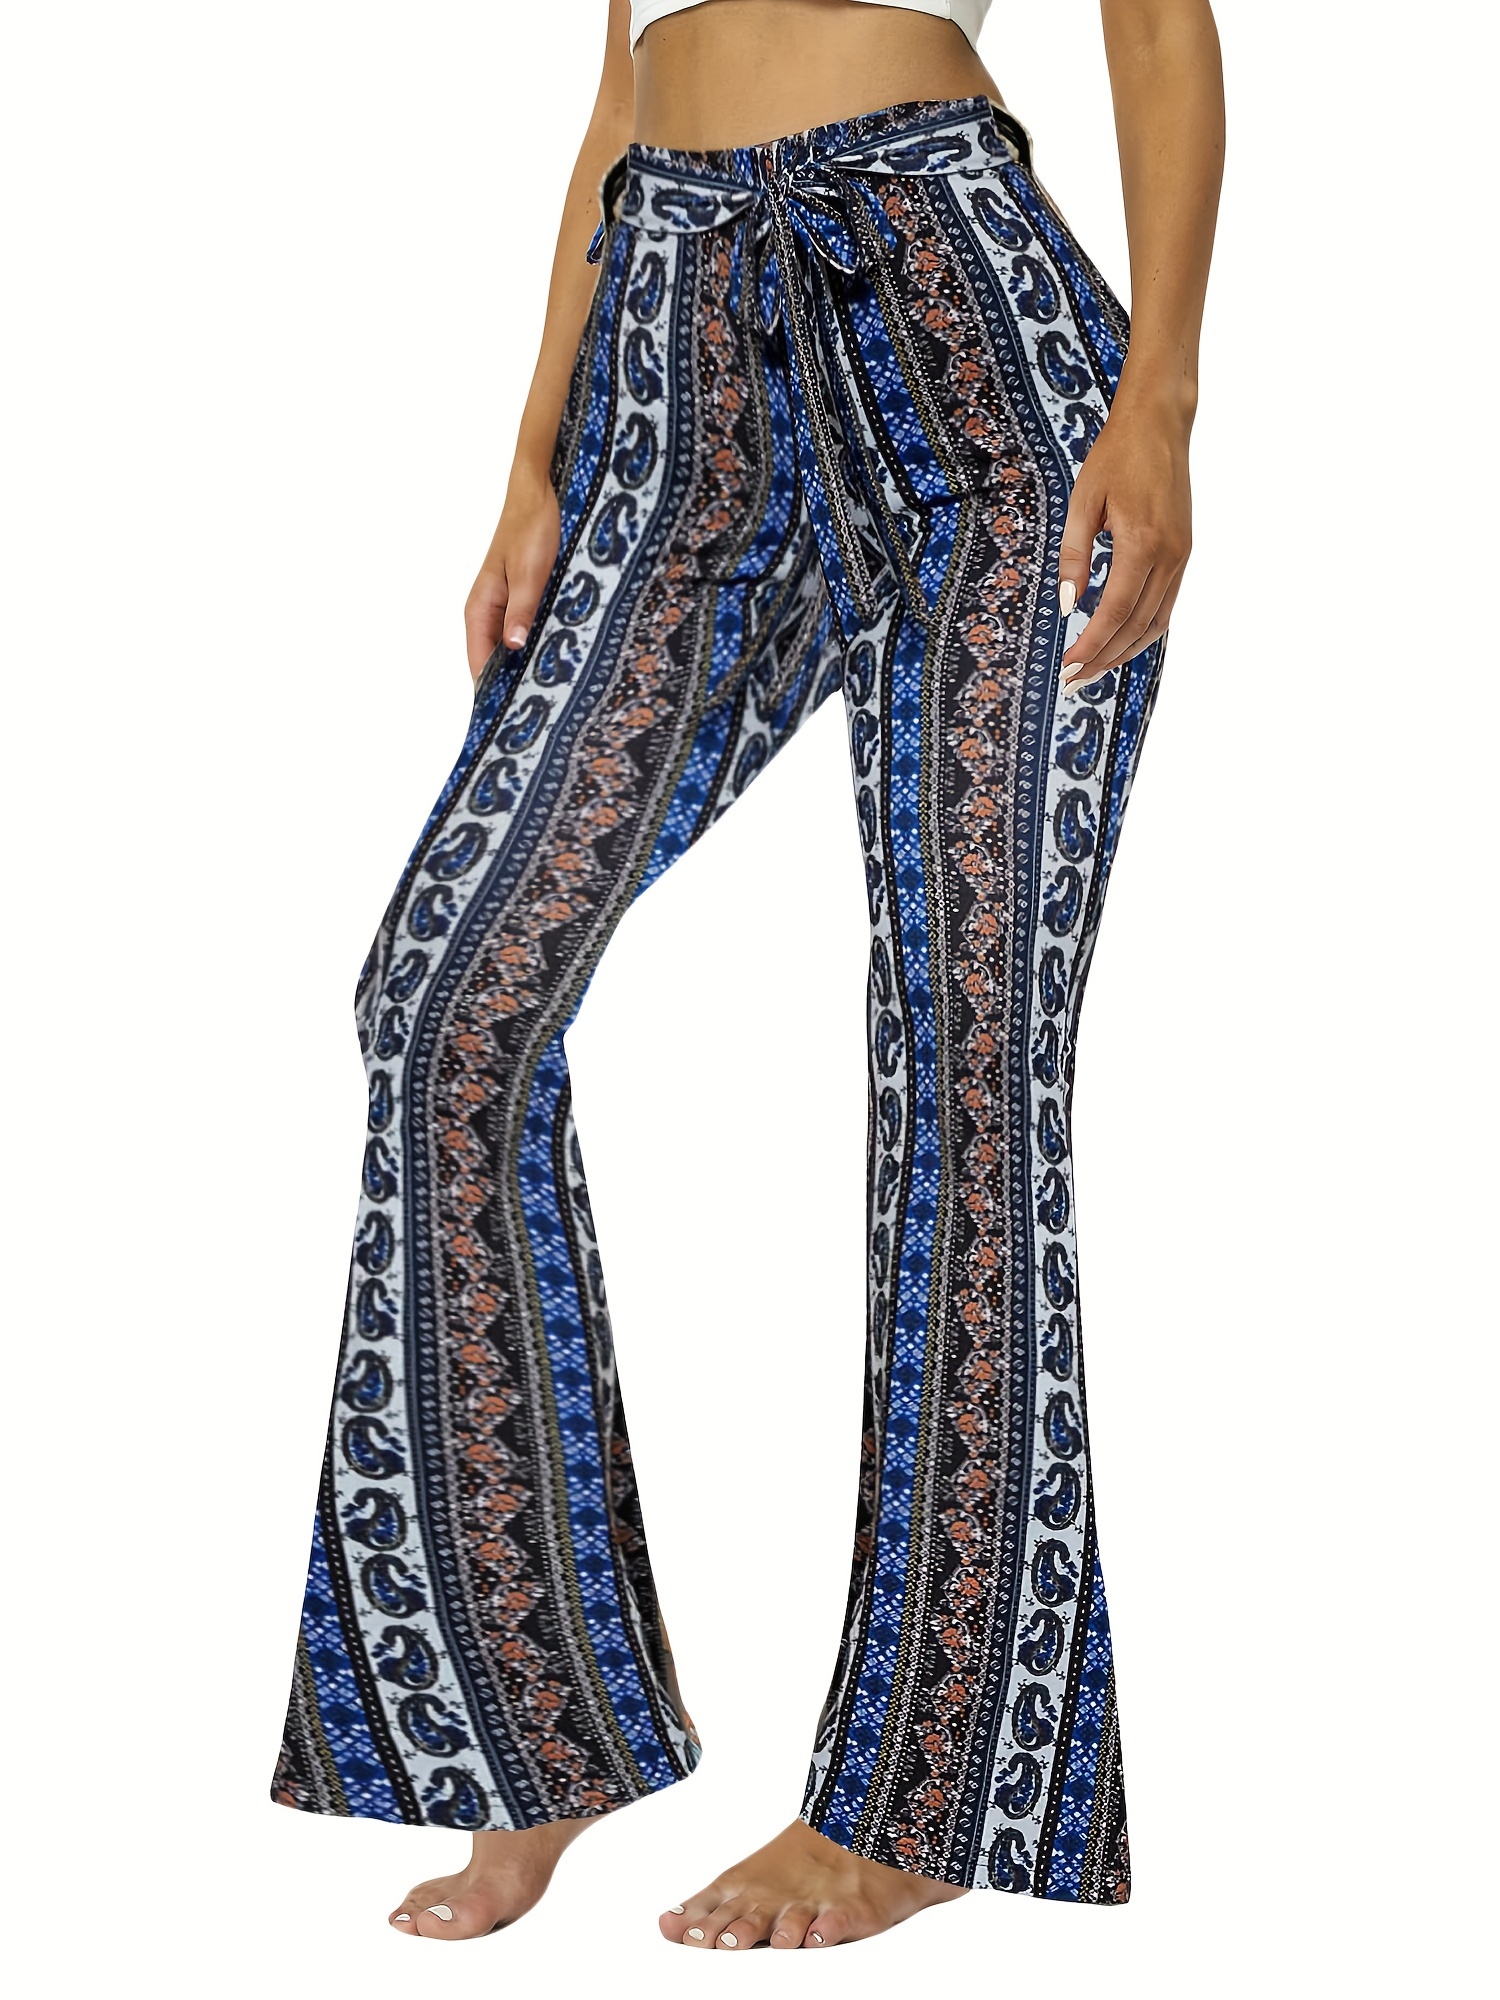 ylioge Womens Paisley Full Length Trousers Stretchy Flare Leg Summer Skinny  Fit High Waist Pants Elastic Waist Party Casual Trousers Pantalones